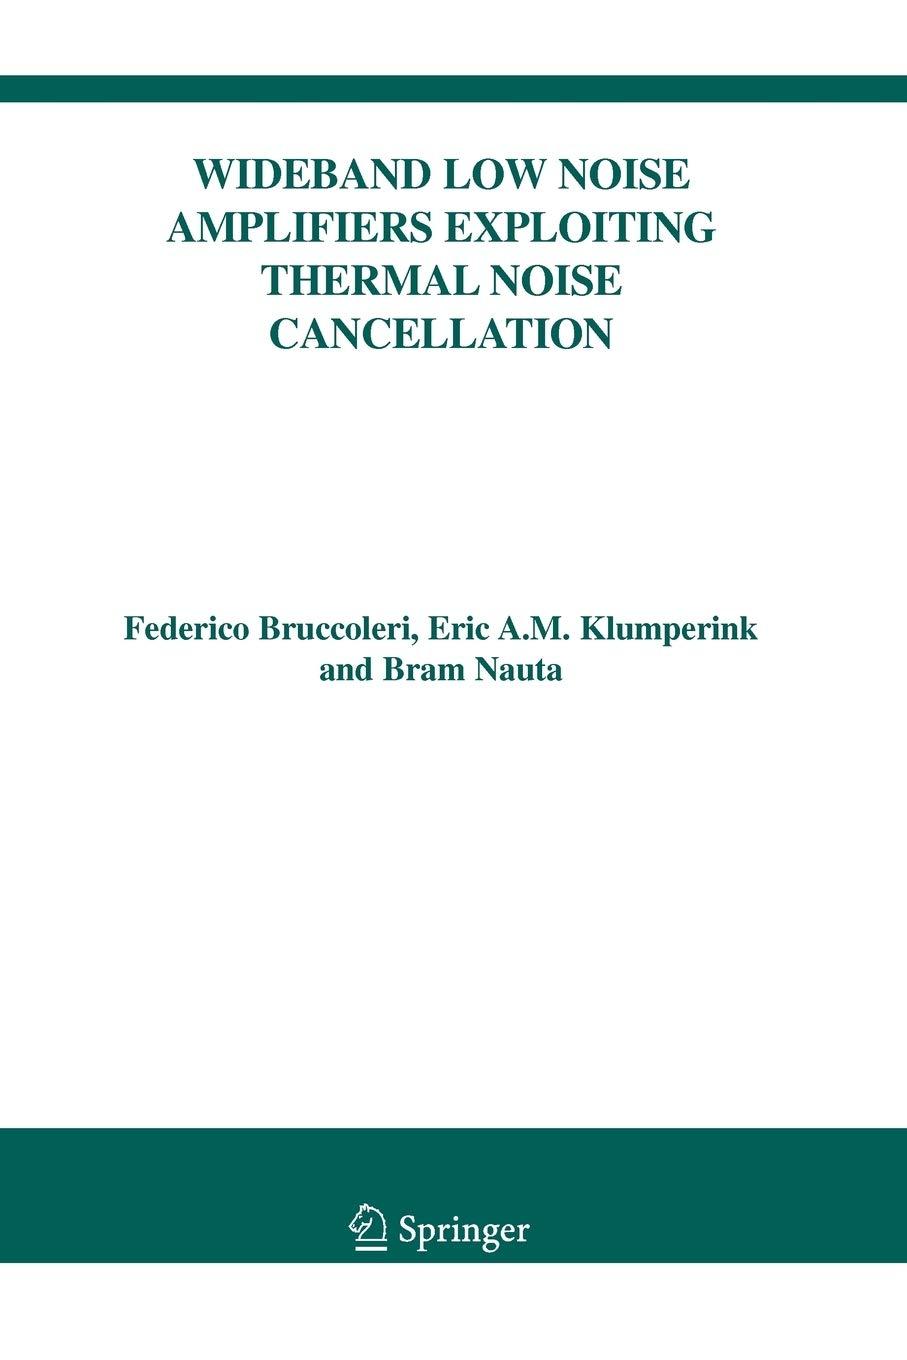 wideband low noise amplifiers exploiting thermal noise cancellation 2005 edition federico bruccoleri, eric